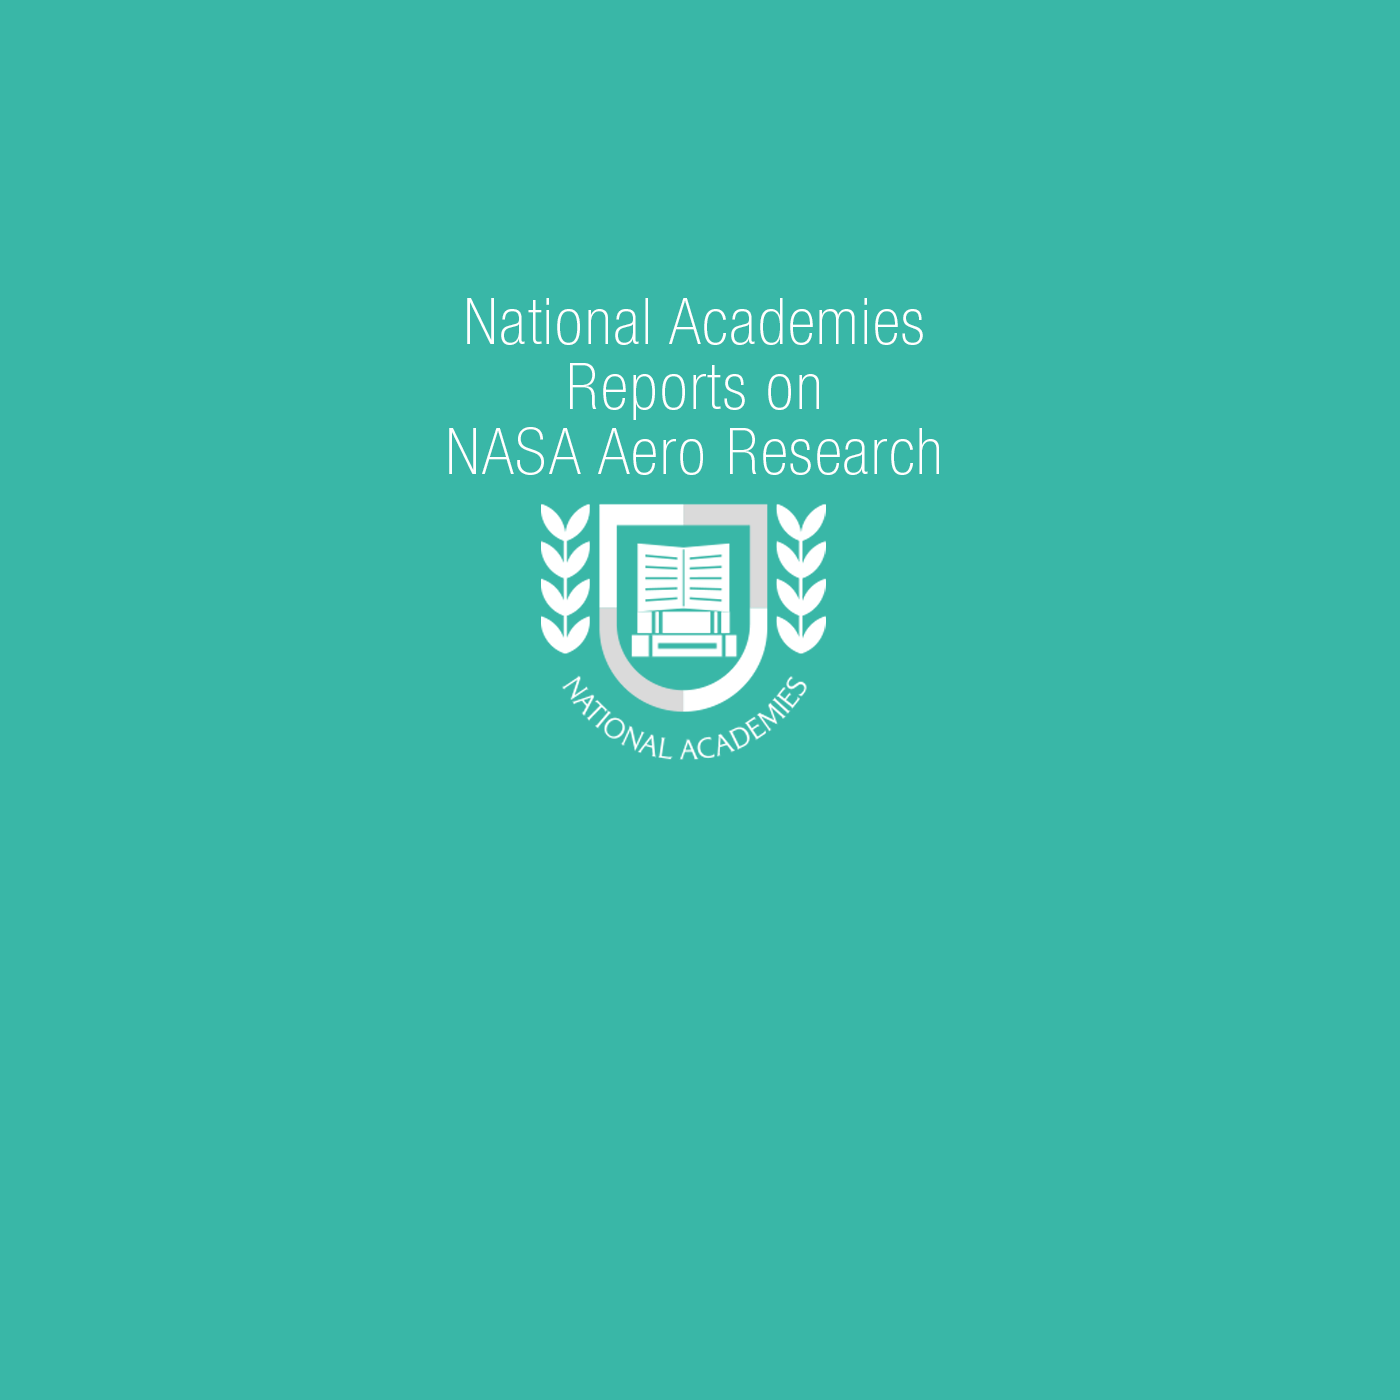 Mint color background with text that says National Academies Reports on NASA Aero Research and a collegiate icon showing books, shield and laurel leafs.